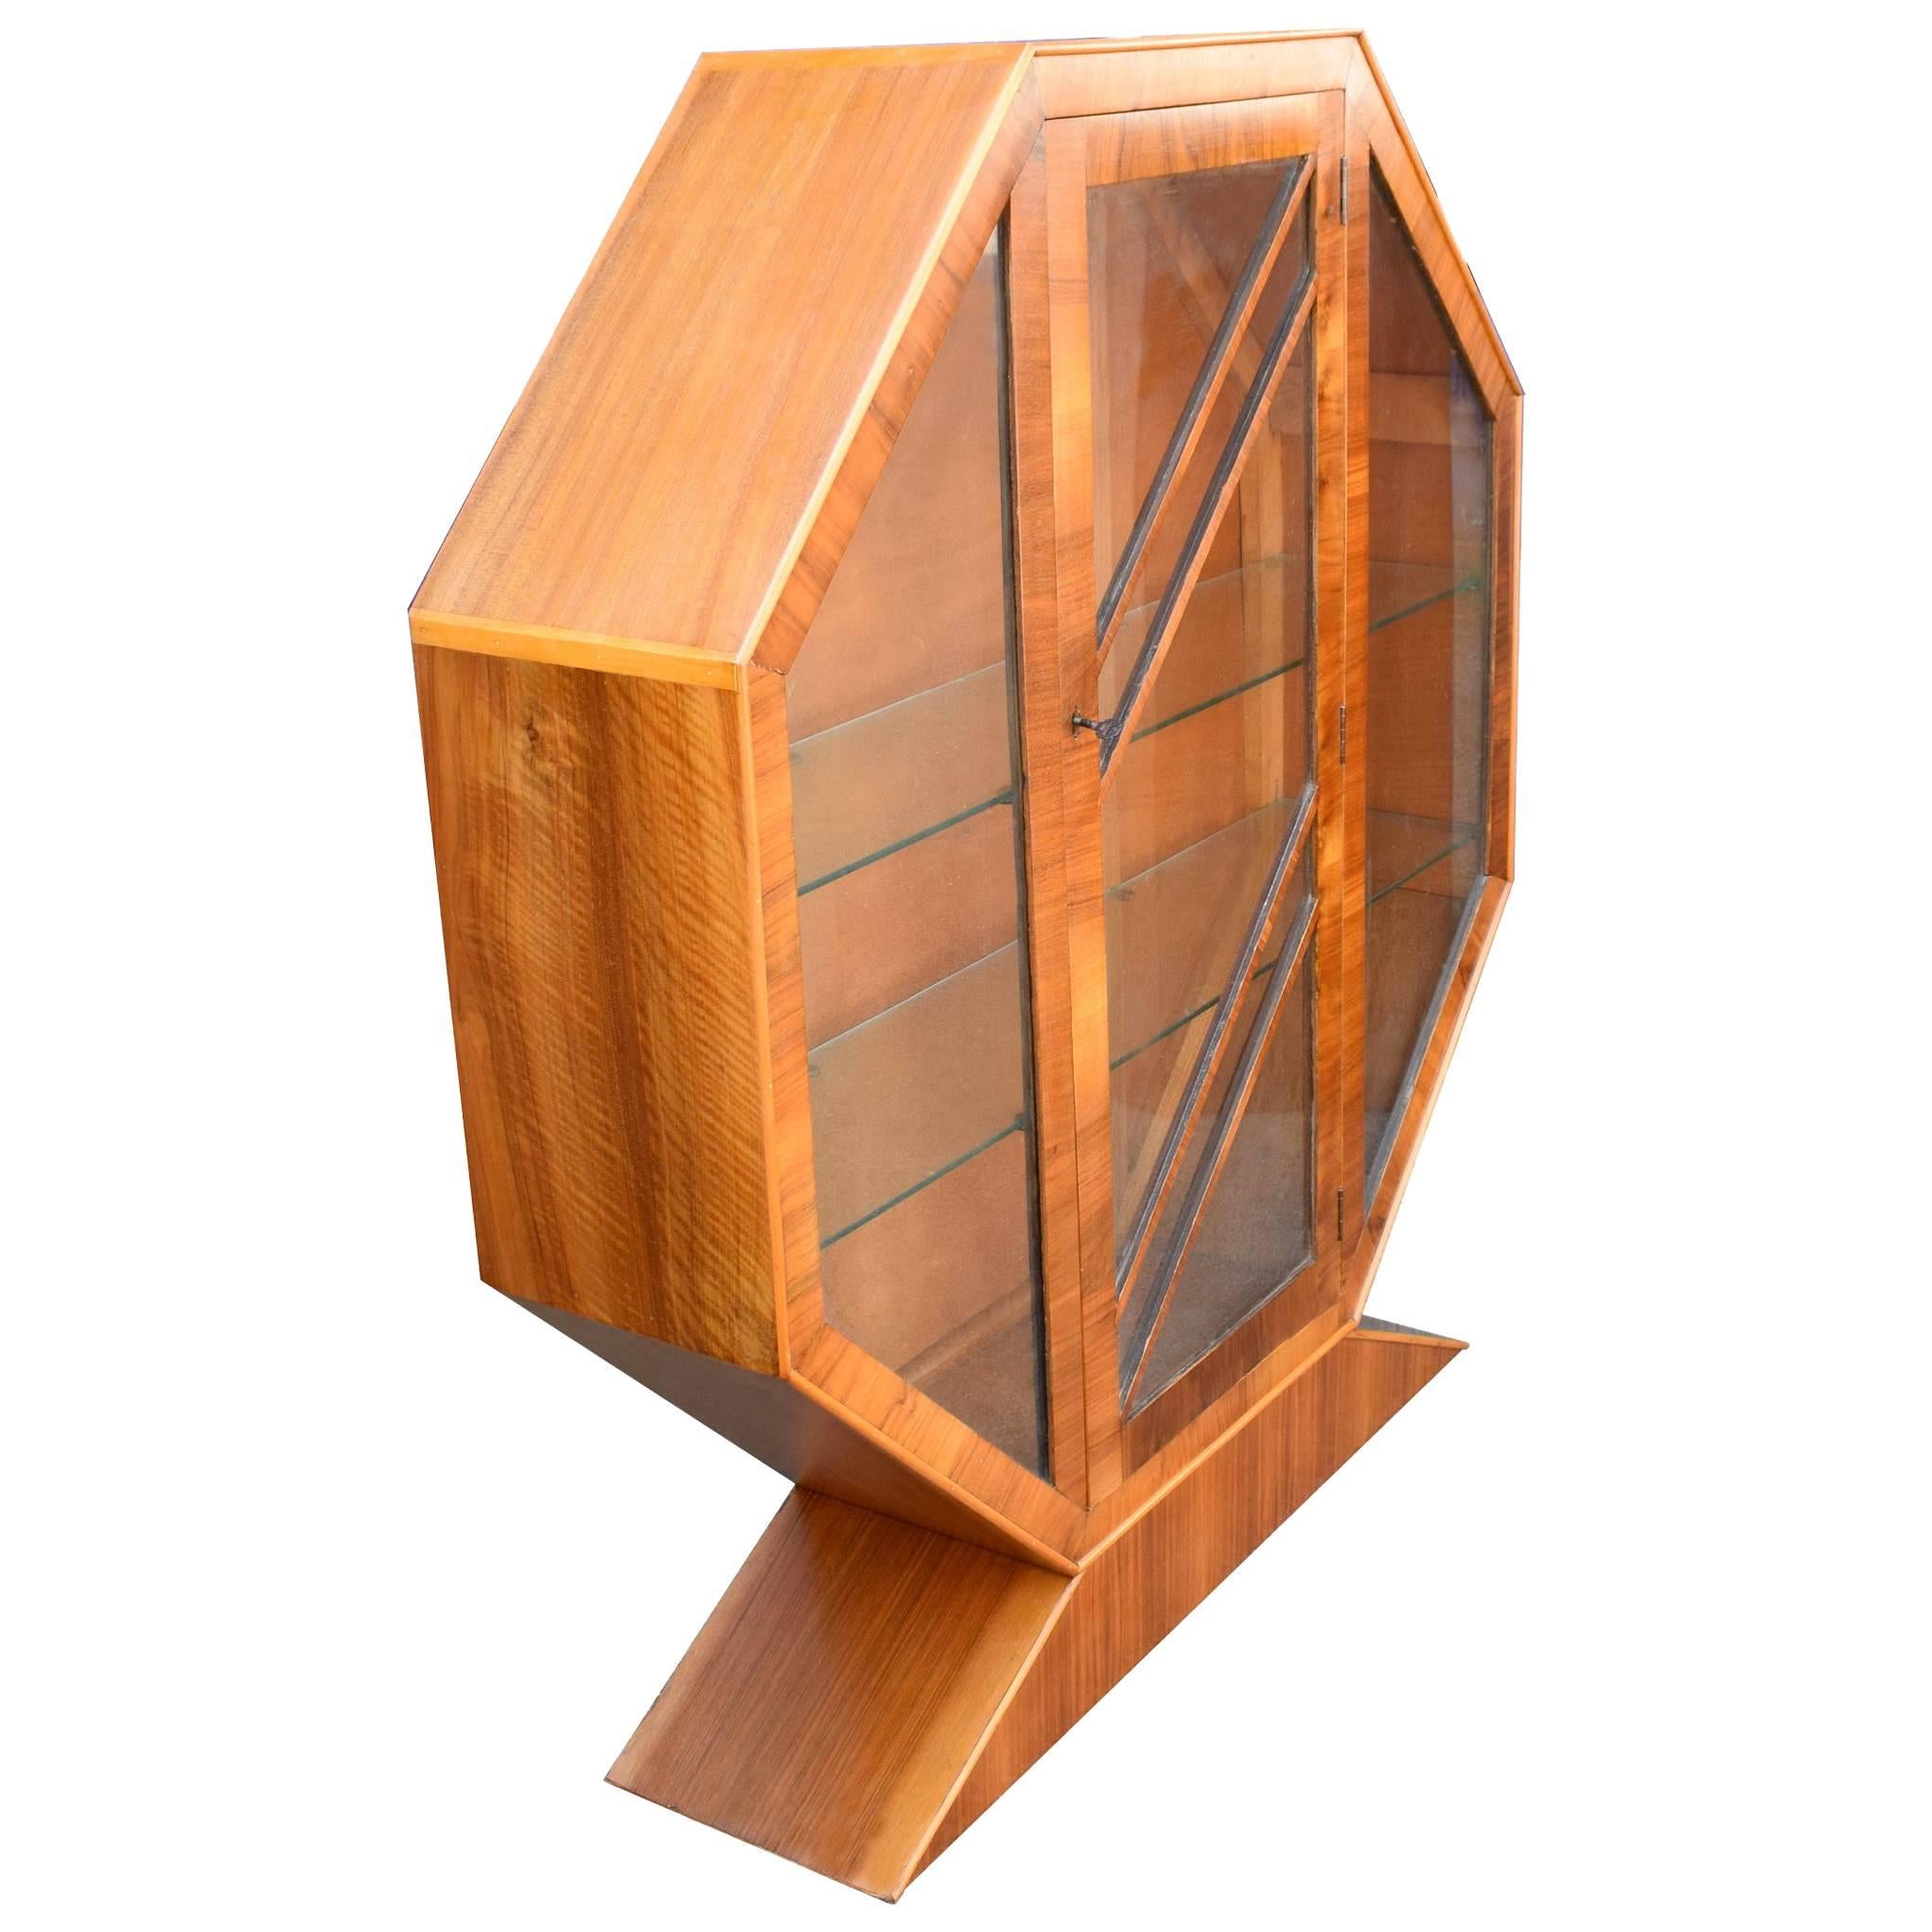 Superb 1930s Art Deco walnut hexagonal display cabinet or vitrine. Very nice veneers to this cabinet being slightly more detailed than the average, a great display piece too having three internal shelves with open glass sides and flat service top